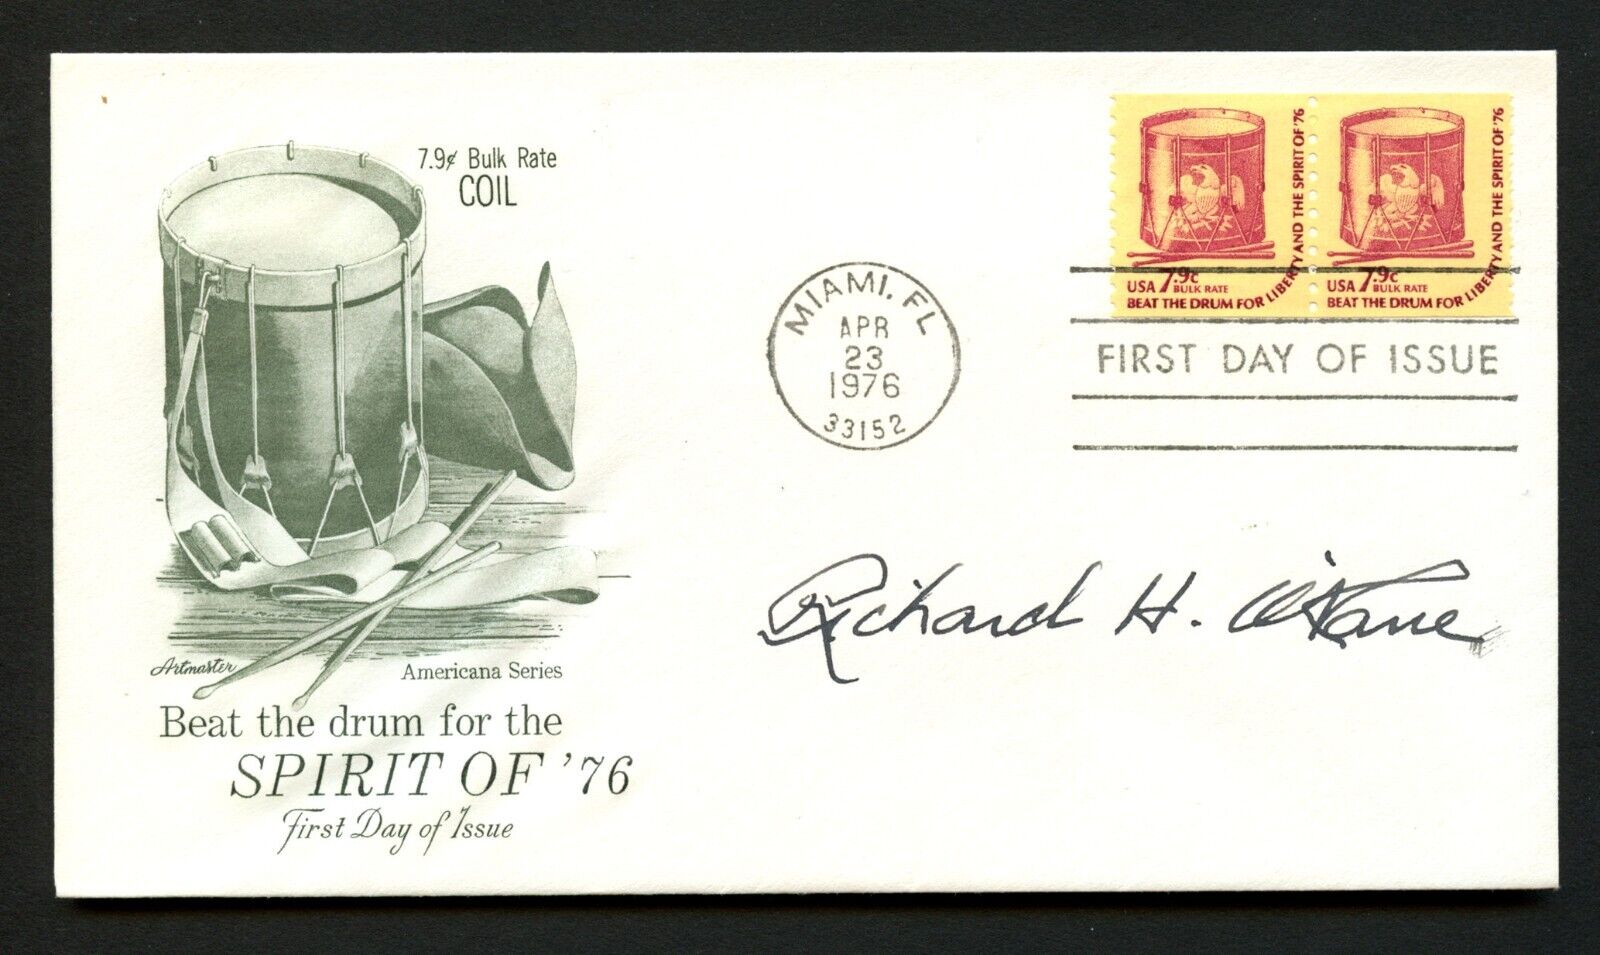 Richard O'Kane d1994 signed autograph FDC Medal of Honor Recipient USN WWII